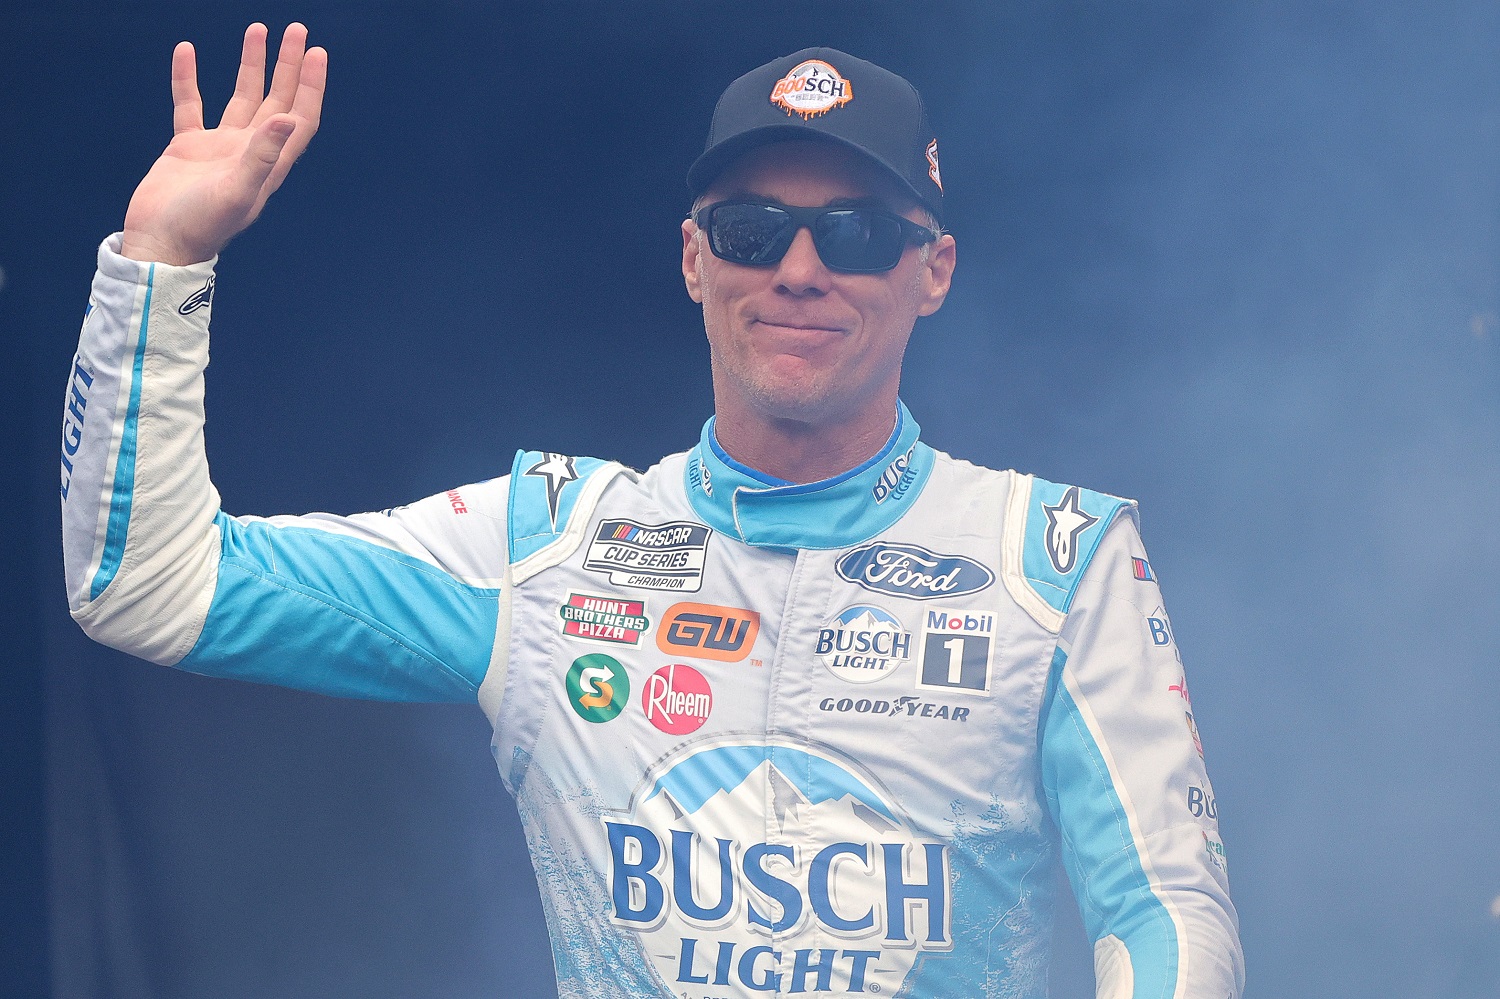 Kevin Harvick waves to fans during driver intros prior to the NASCAR Cup Series Xfinity 500 at Martinsville Speedway on Oct. 30, 2022. | Stacy Revere/Getty Images